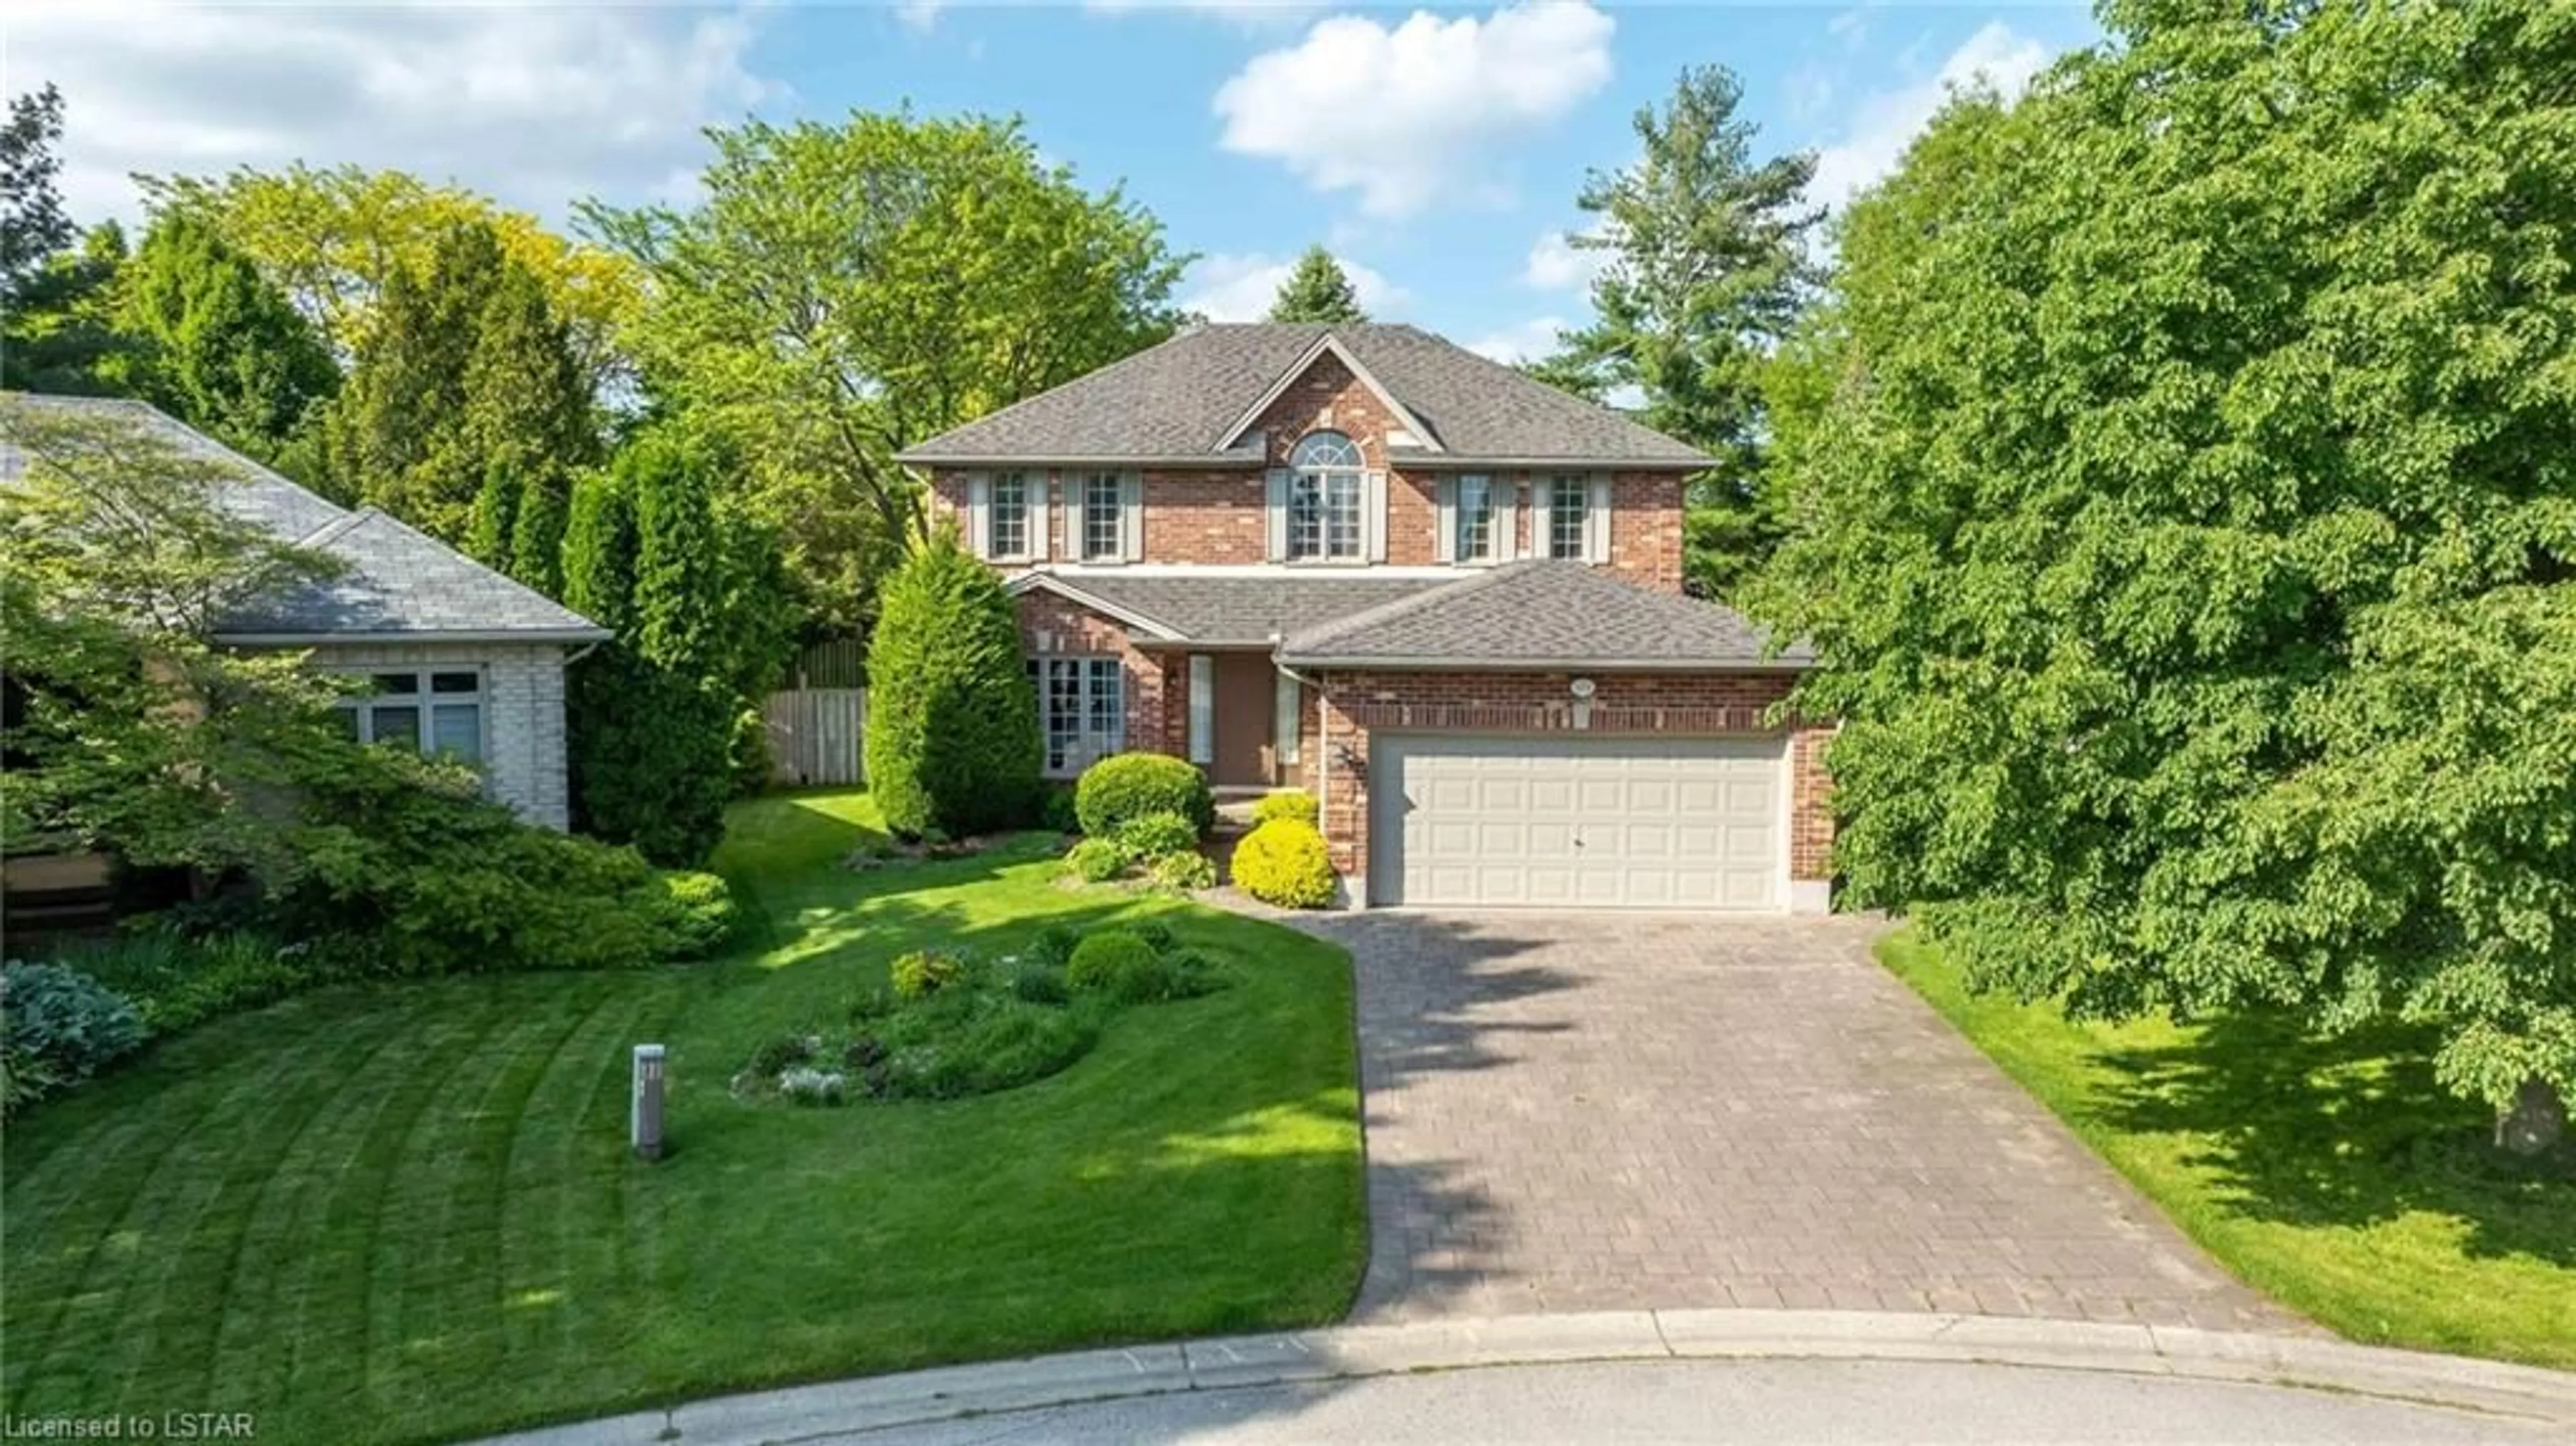 Frontside or backside of a home for 434 Stonehaven Pl, London Ontario N6H 5N3